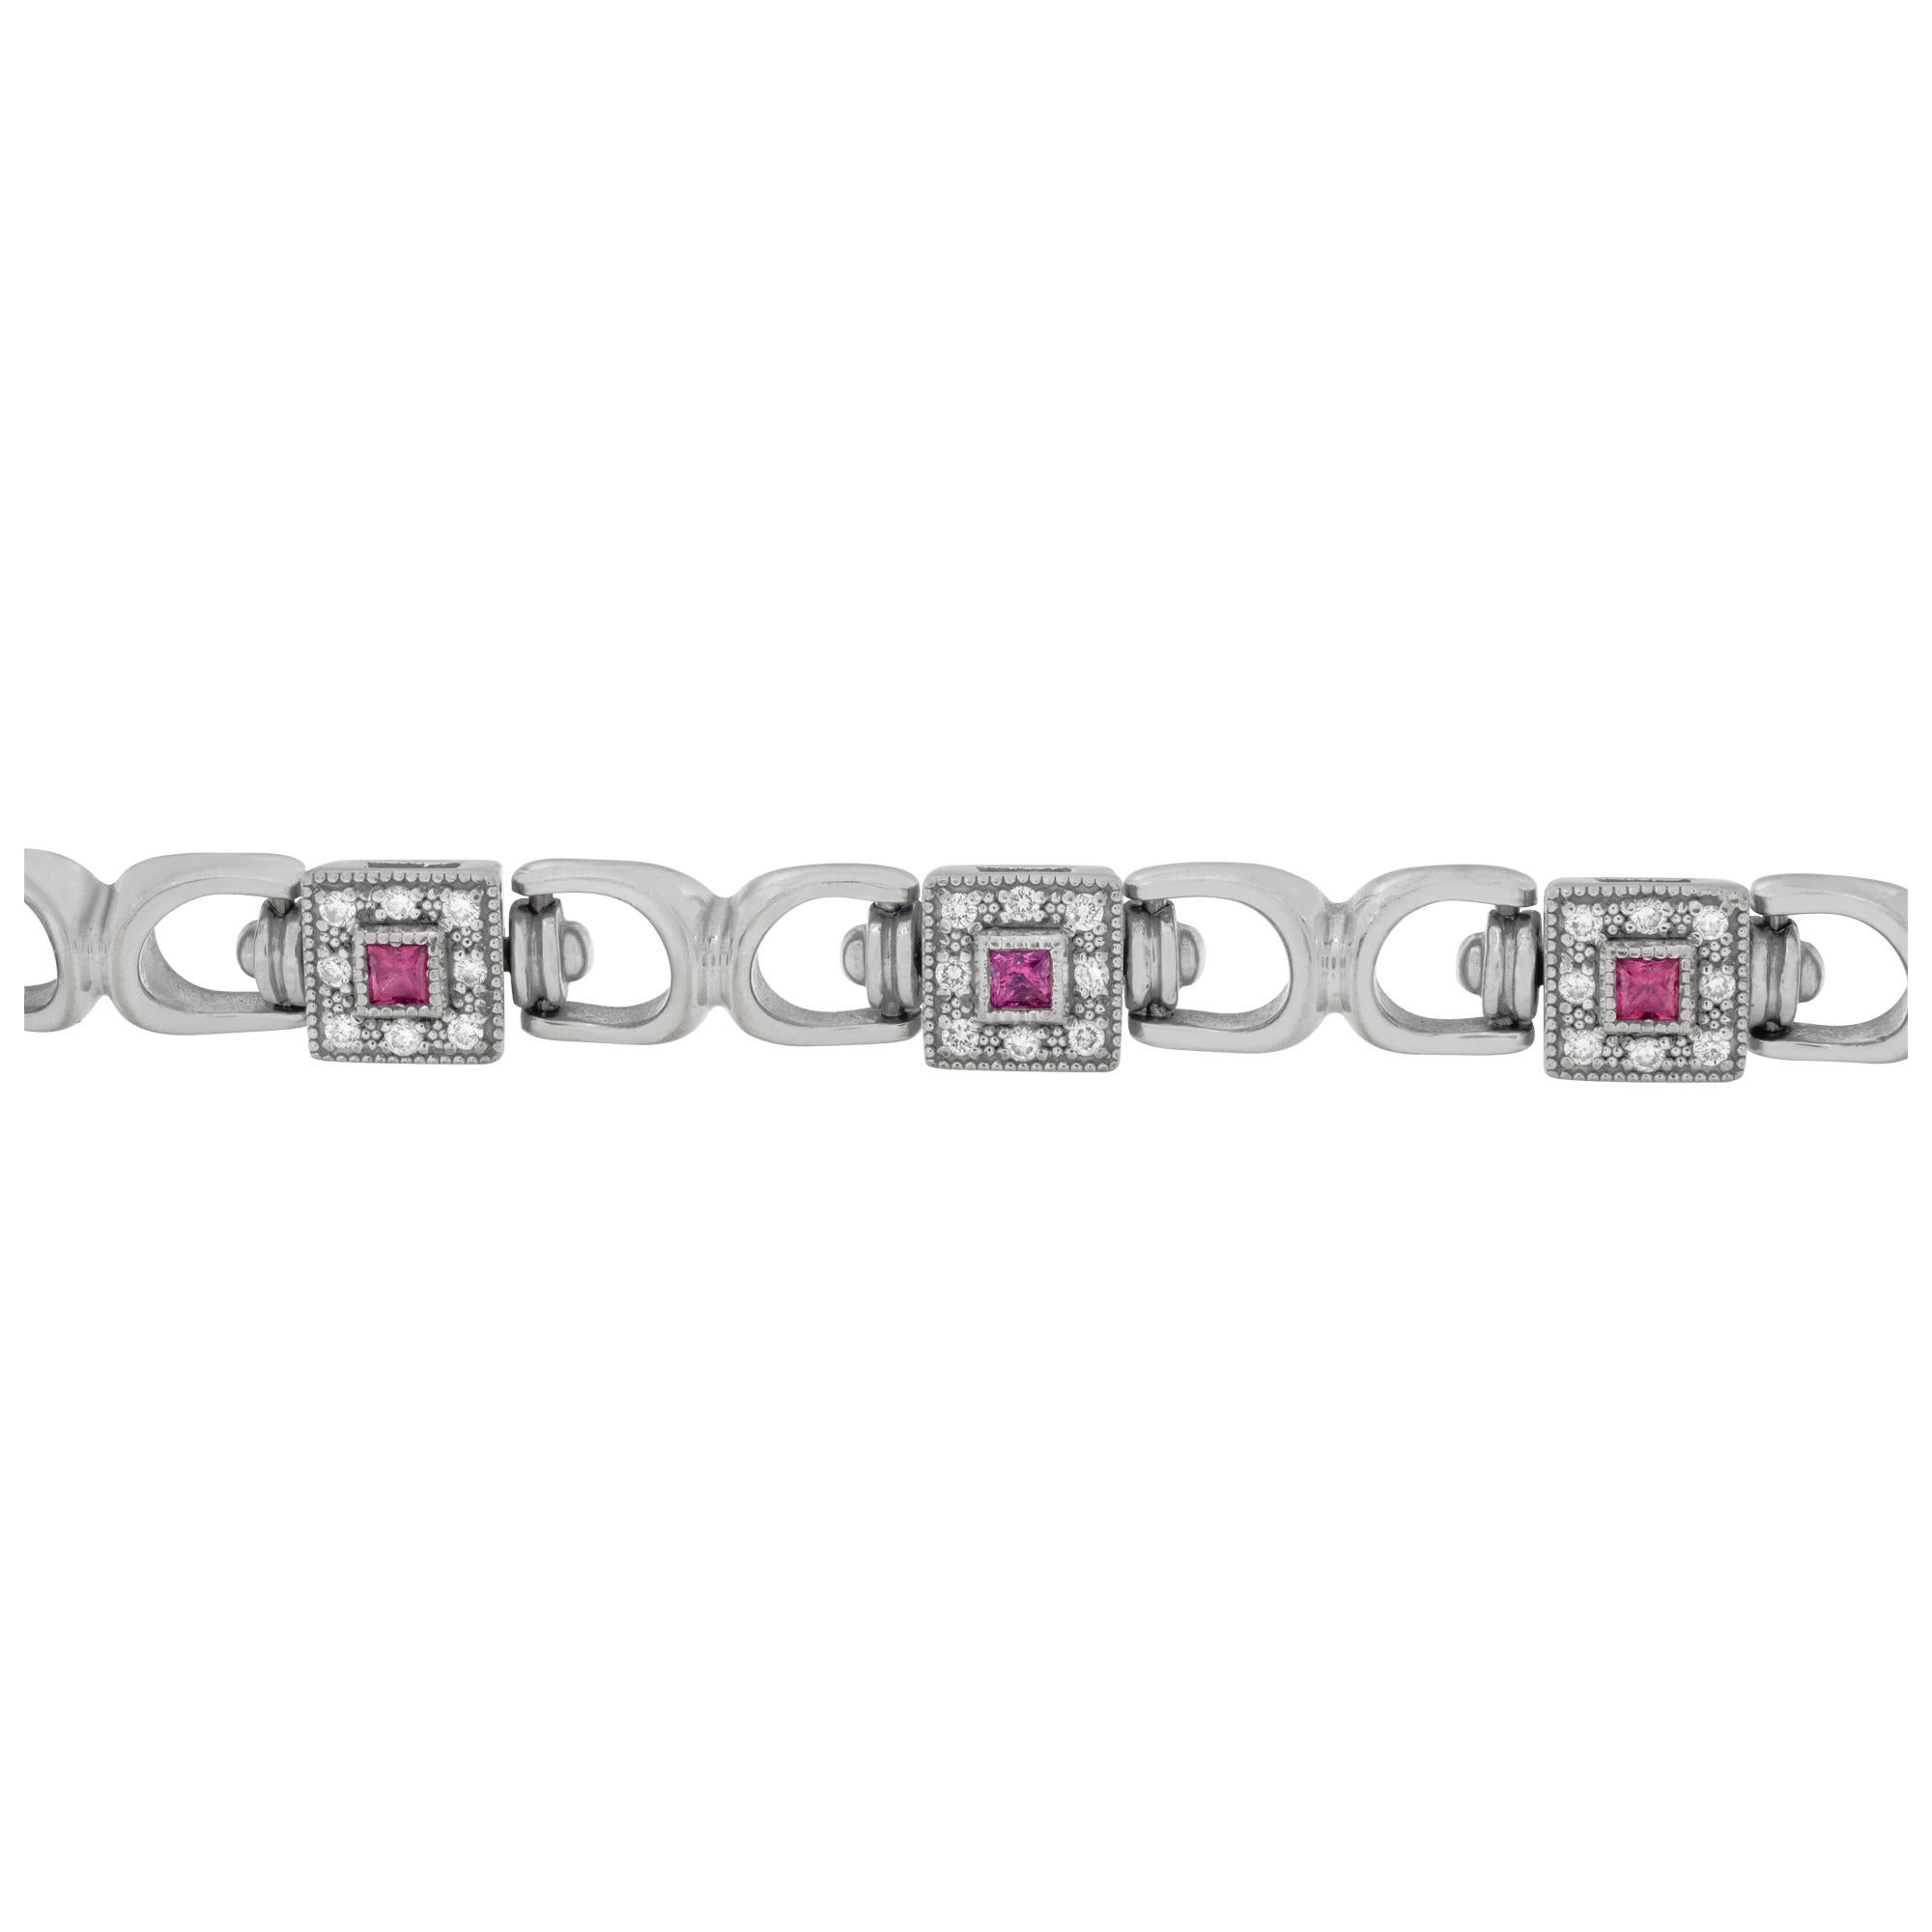 French designer CHARRIOL heavy link diamonds & pink sapphires bracelet. Round brilliant cut diamonds total approx. weight: 0.50 carat, estimate: G/H color, VS/SI clarity. Princess cut pink sapphire total approx. weight: 0.50 carat. Double security